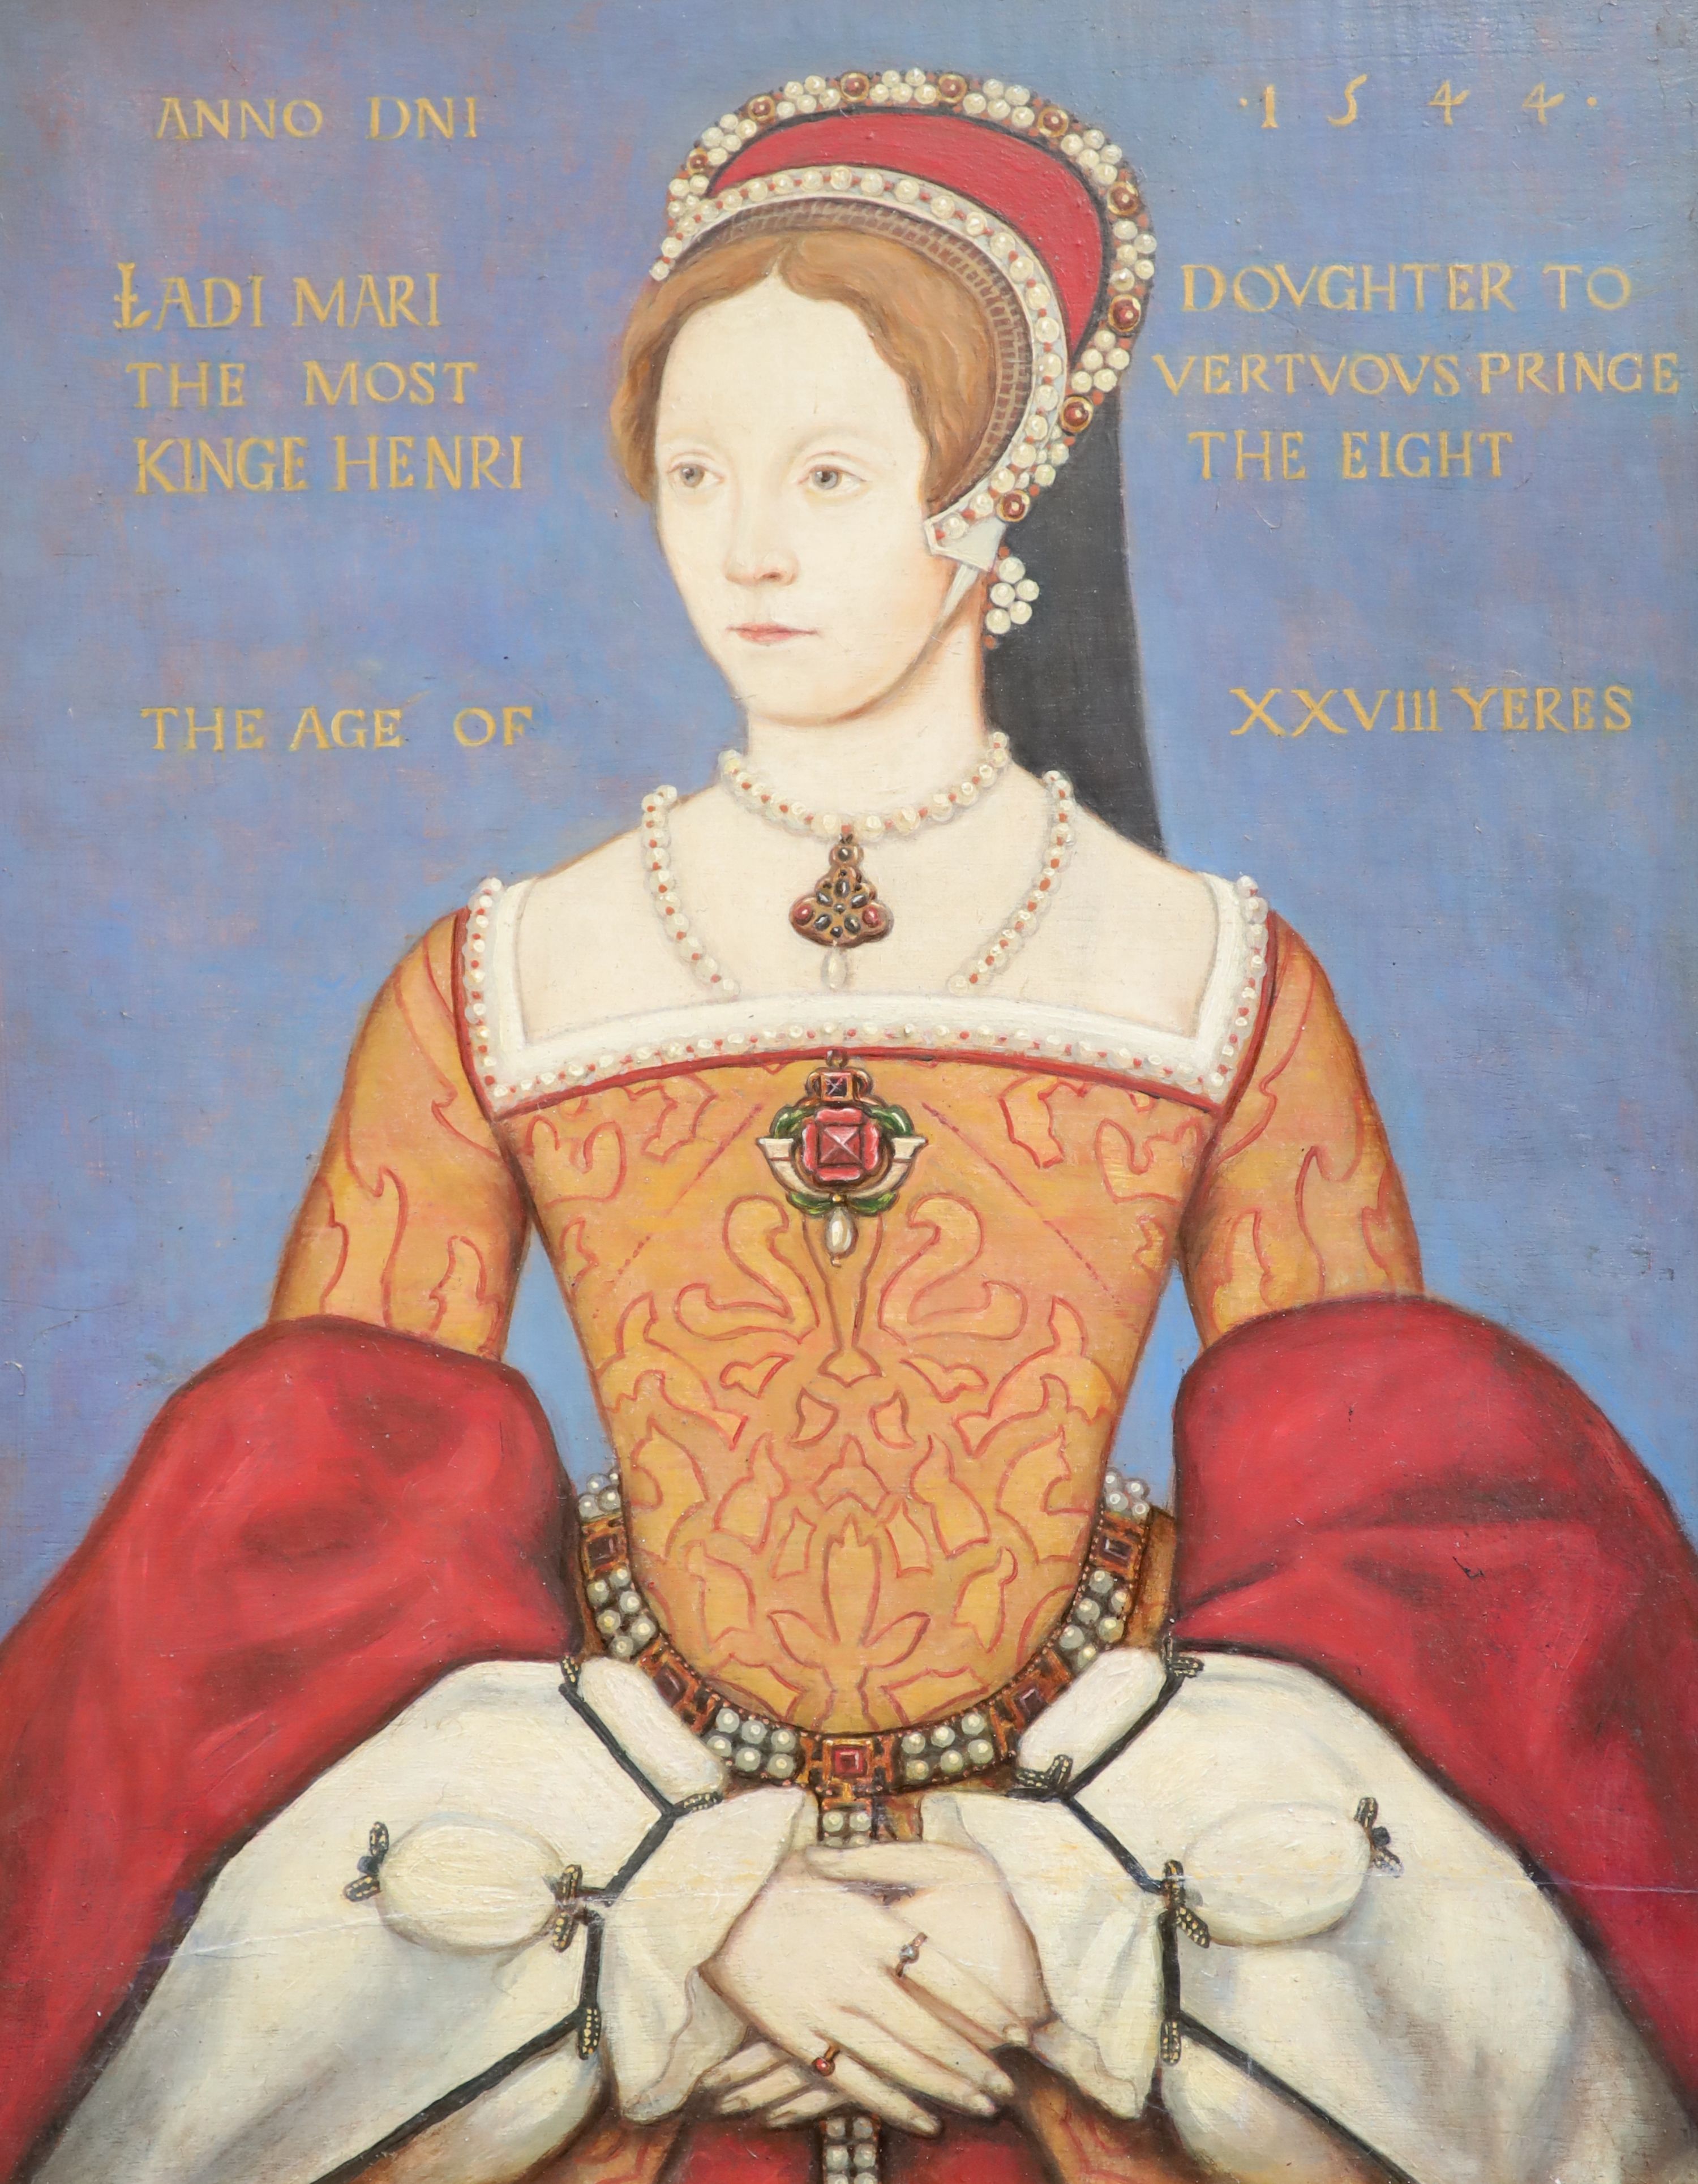 After Master John Portrait of Queen Mary, 1544 16 x 12.75in.